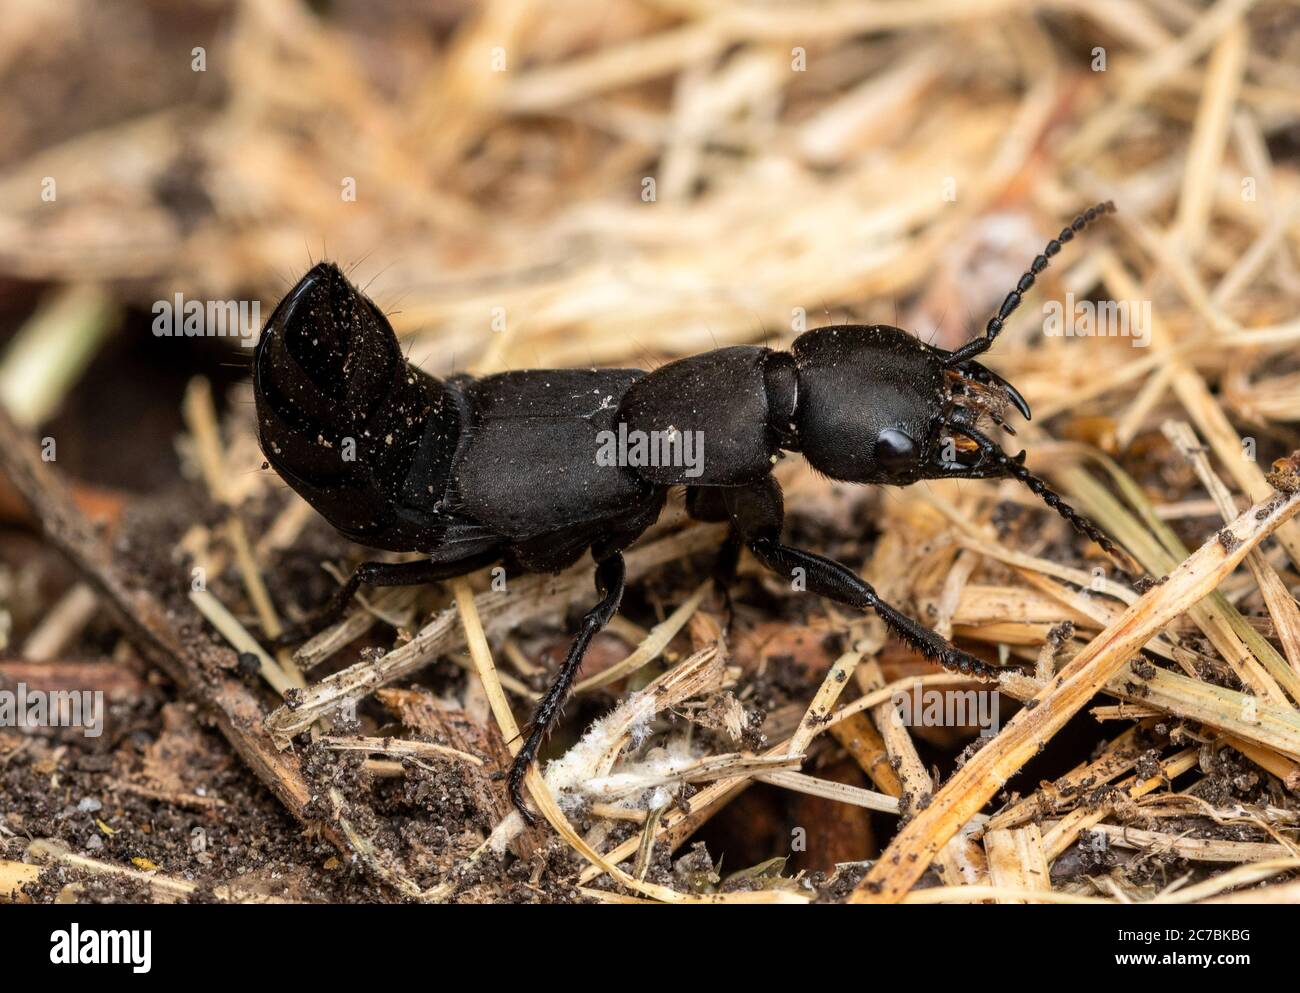 Devil's coach horse beetle (Ocypus olens) in an aggressive, scorpion-like position with raised rear end Stock Photo